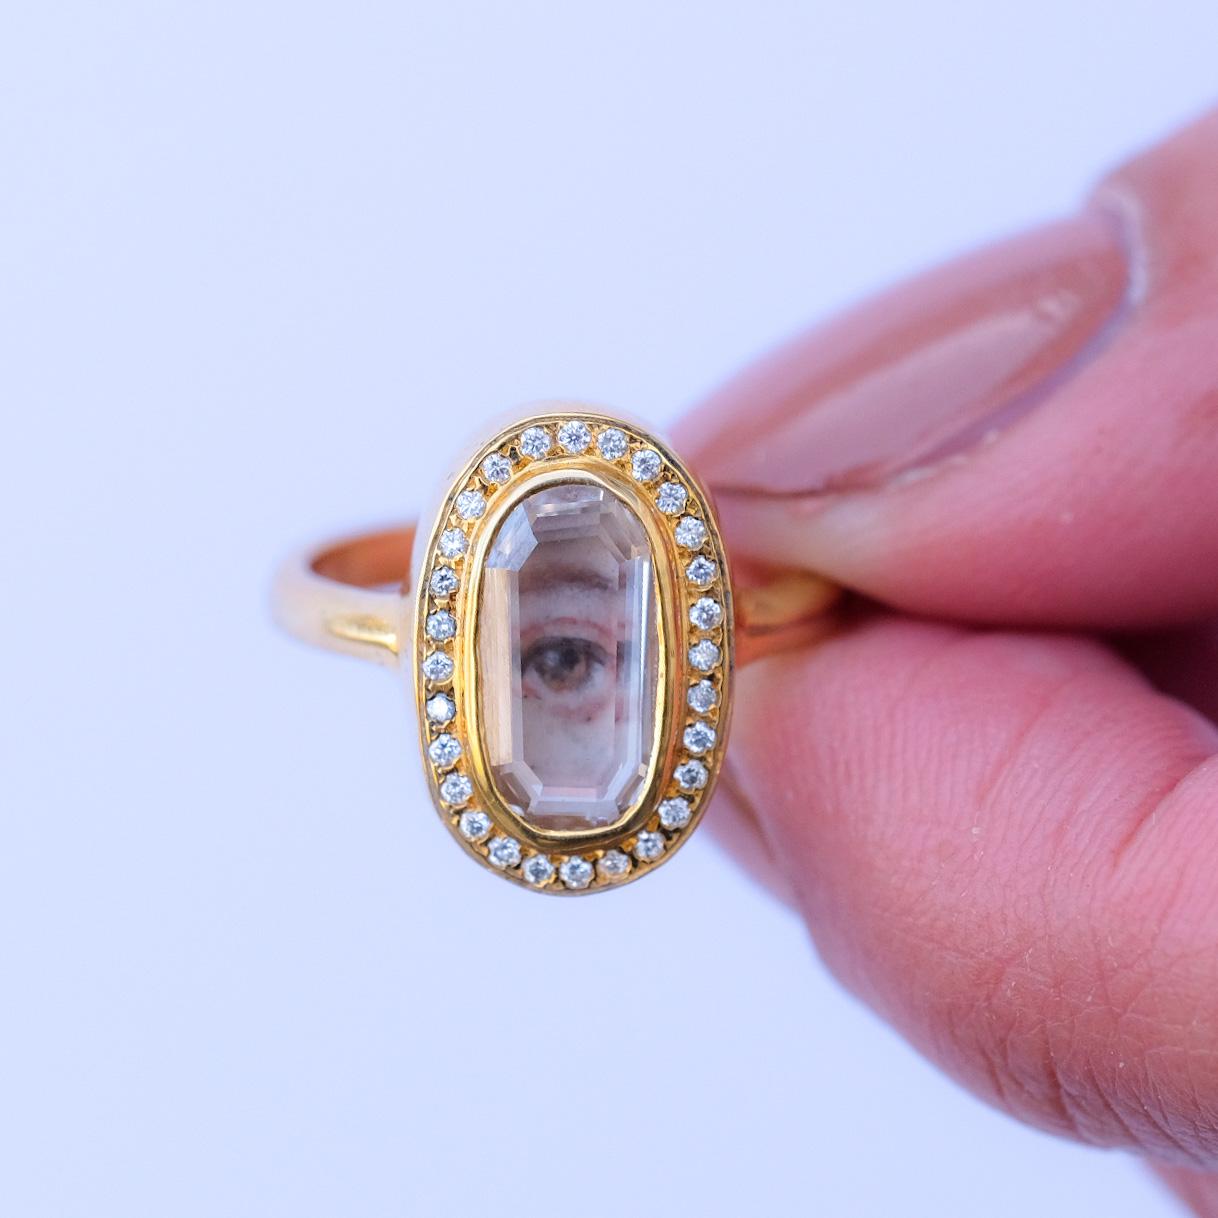 1.49 ct GIA certified portrait diamond over a custom enamelled miniature eye with .50 ct 1.7mm Vs1 round brilliants in 18k Yellow gold.

The eye in this ring is customizable, with a 8-10 week turnaround. 





Report number: 5211281102

